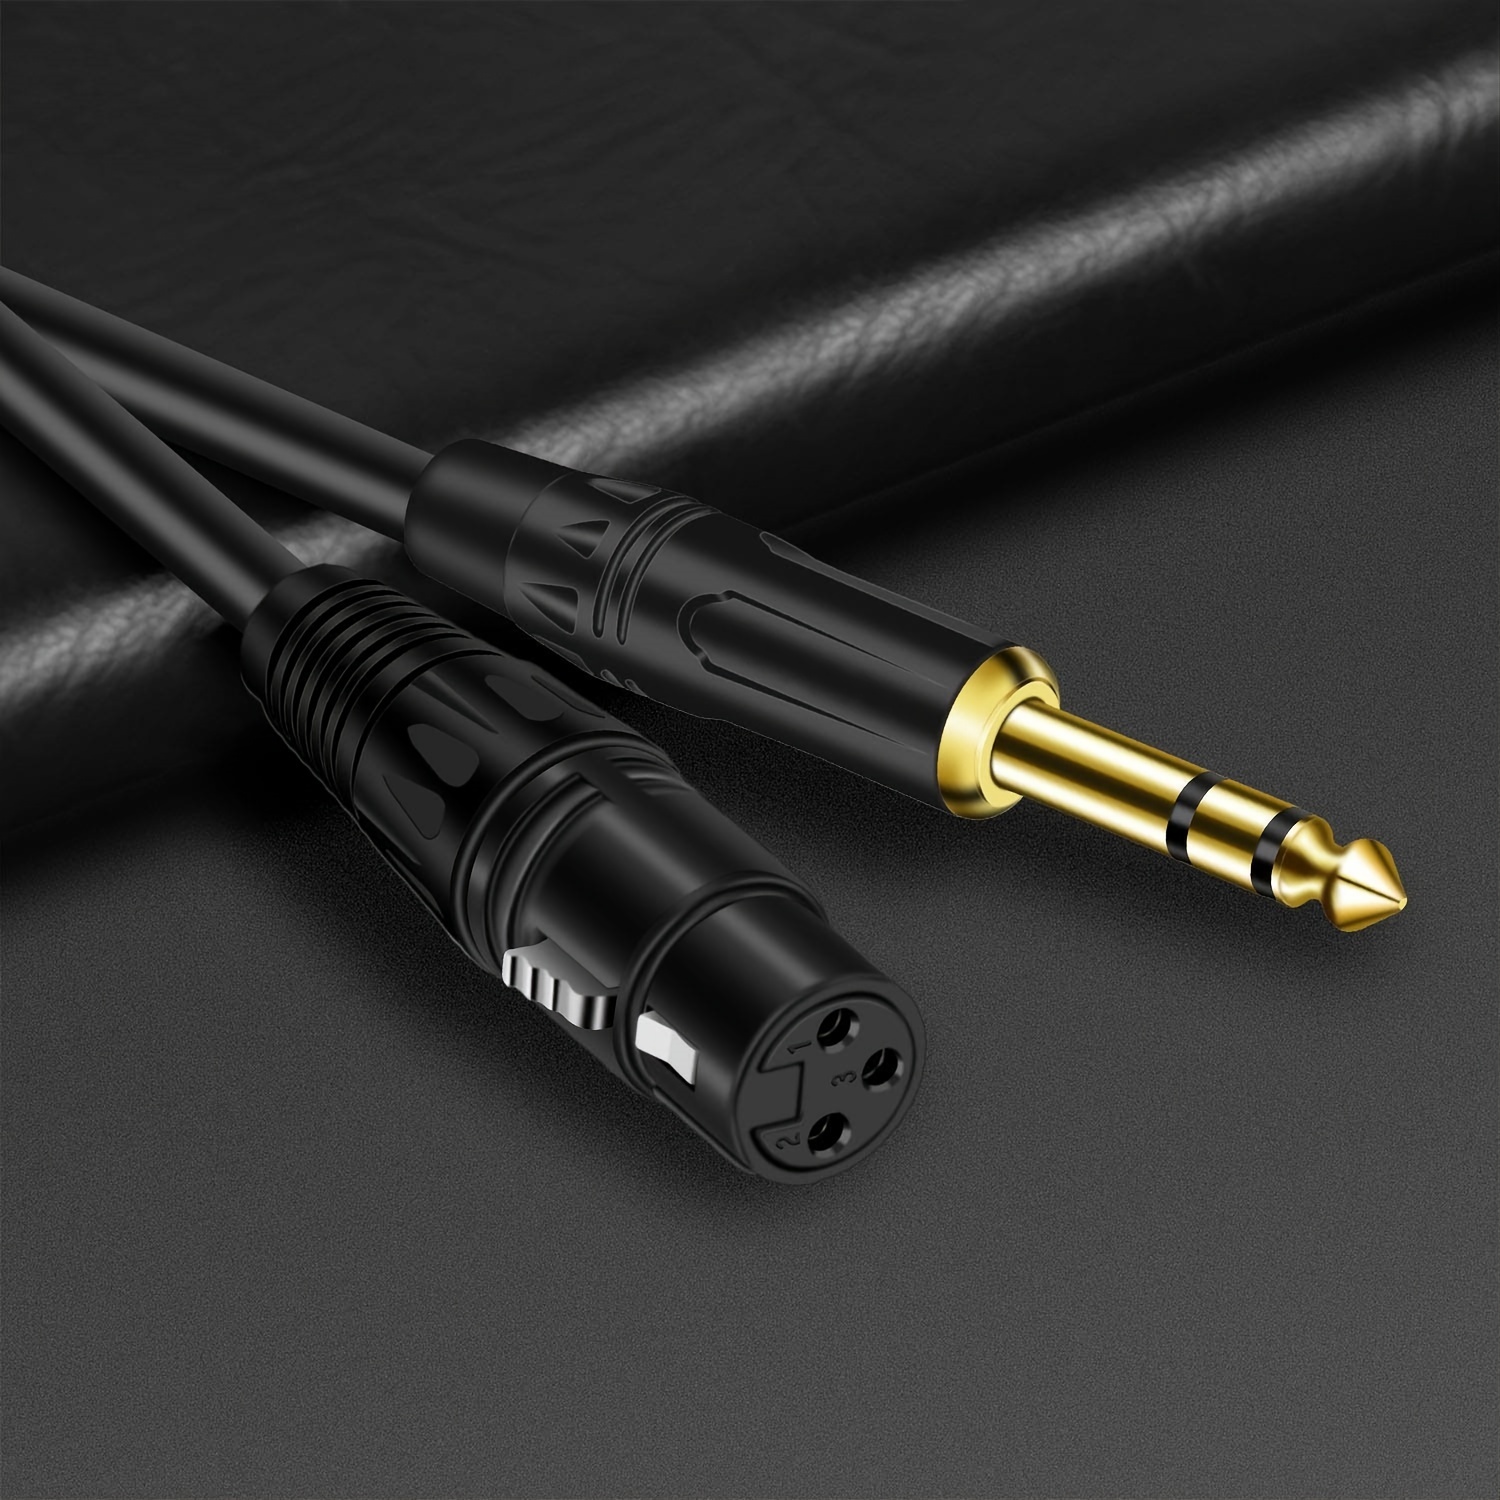 6ft (1.8m) Pro-Audio XLR Male to XLR Female Cable, Audio Cables, AV Cables